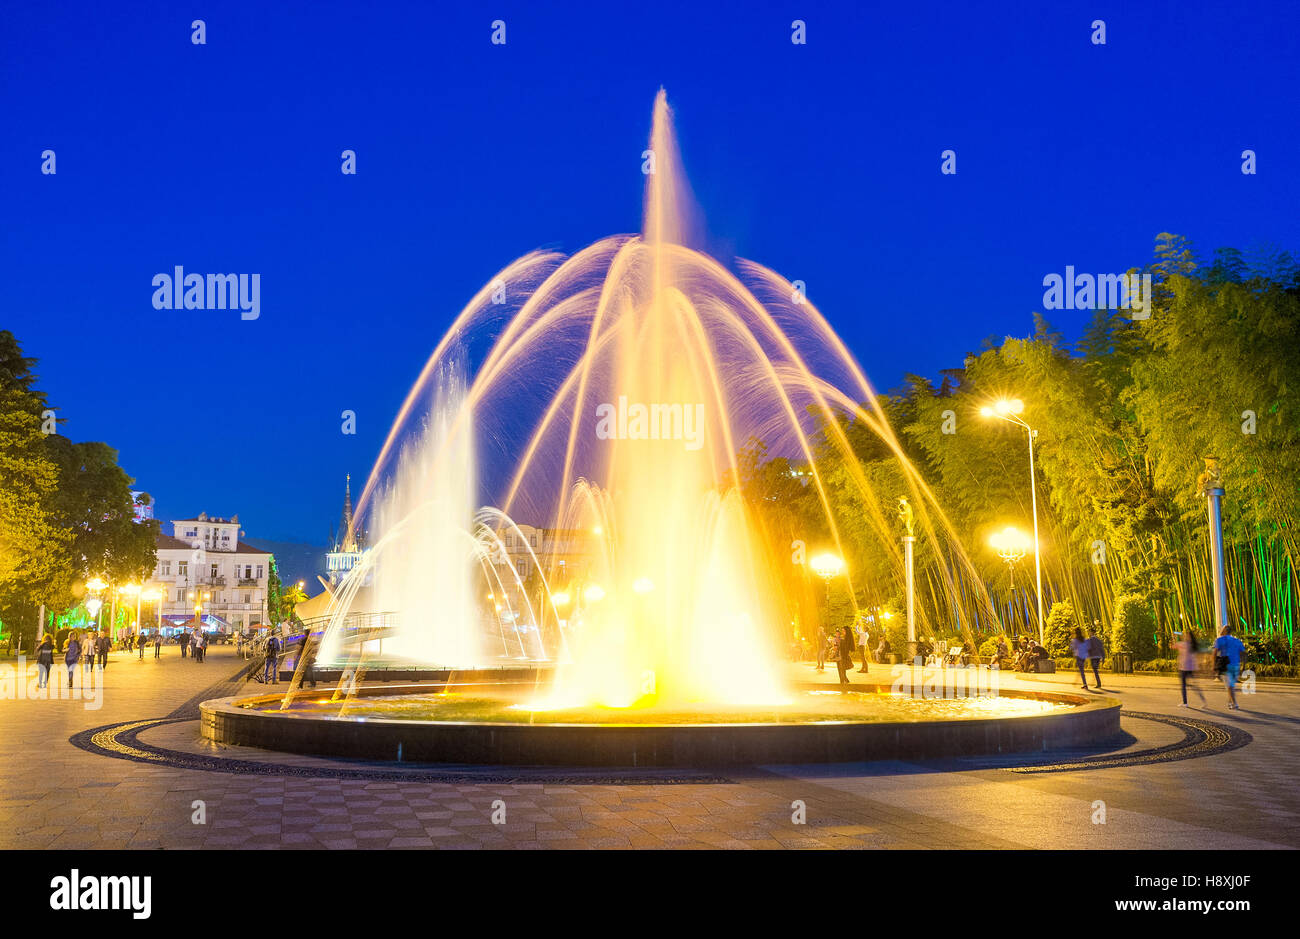 The singing and dancing fountains in Primorsky (Seaside) park are considered as attraction number one in city, Batumi, Georgia. Stock Photo